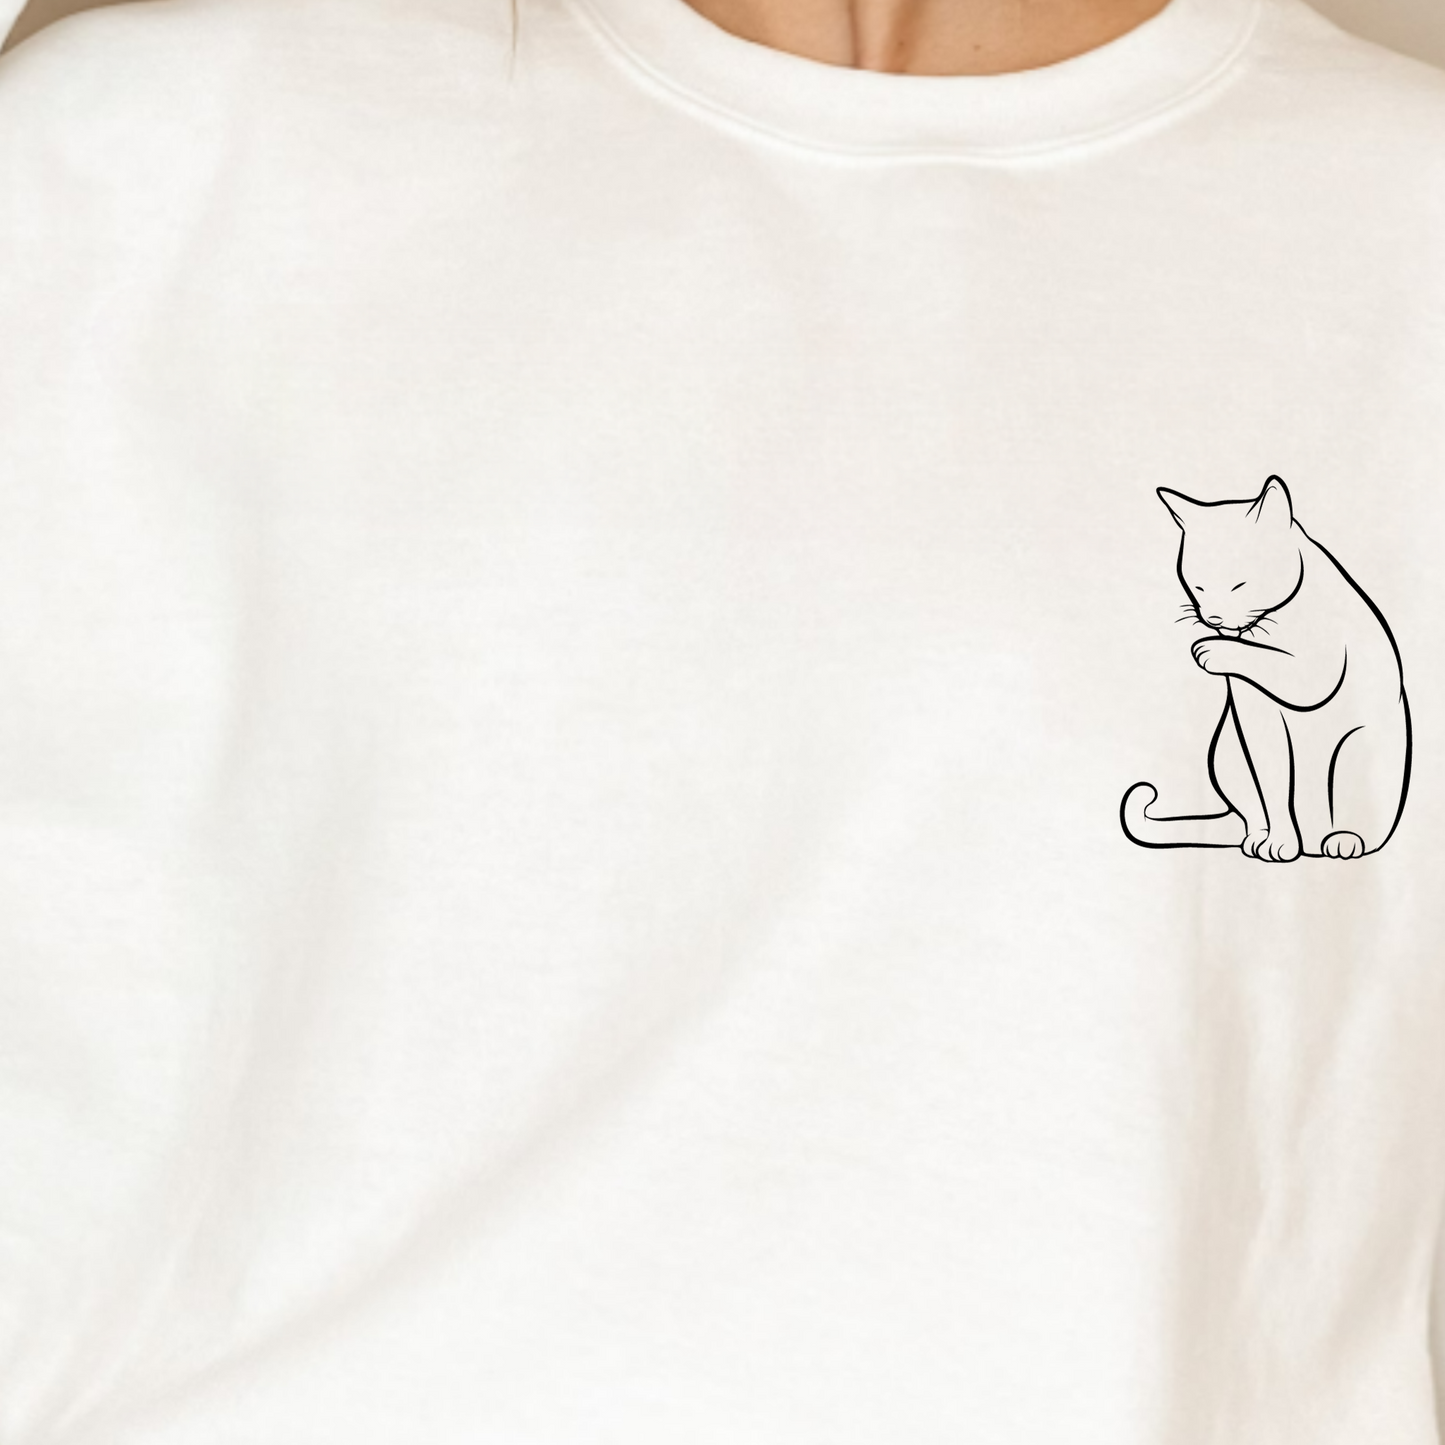 (Shirt not included) Cat Silhouette POCKET - Clear Film Transfer